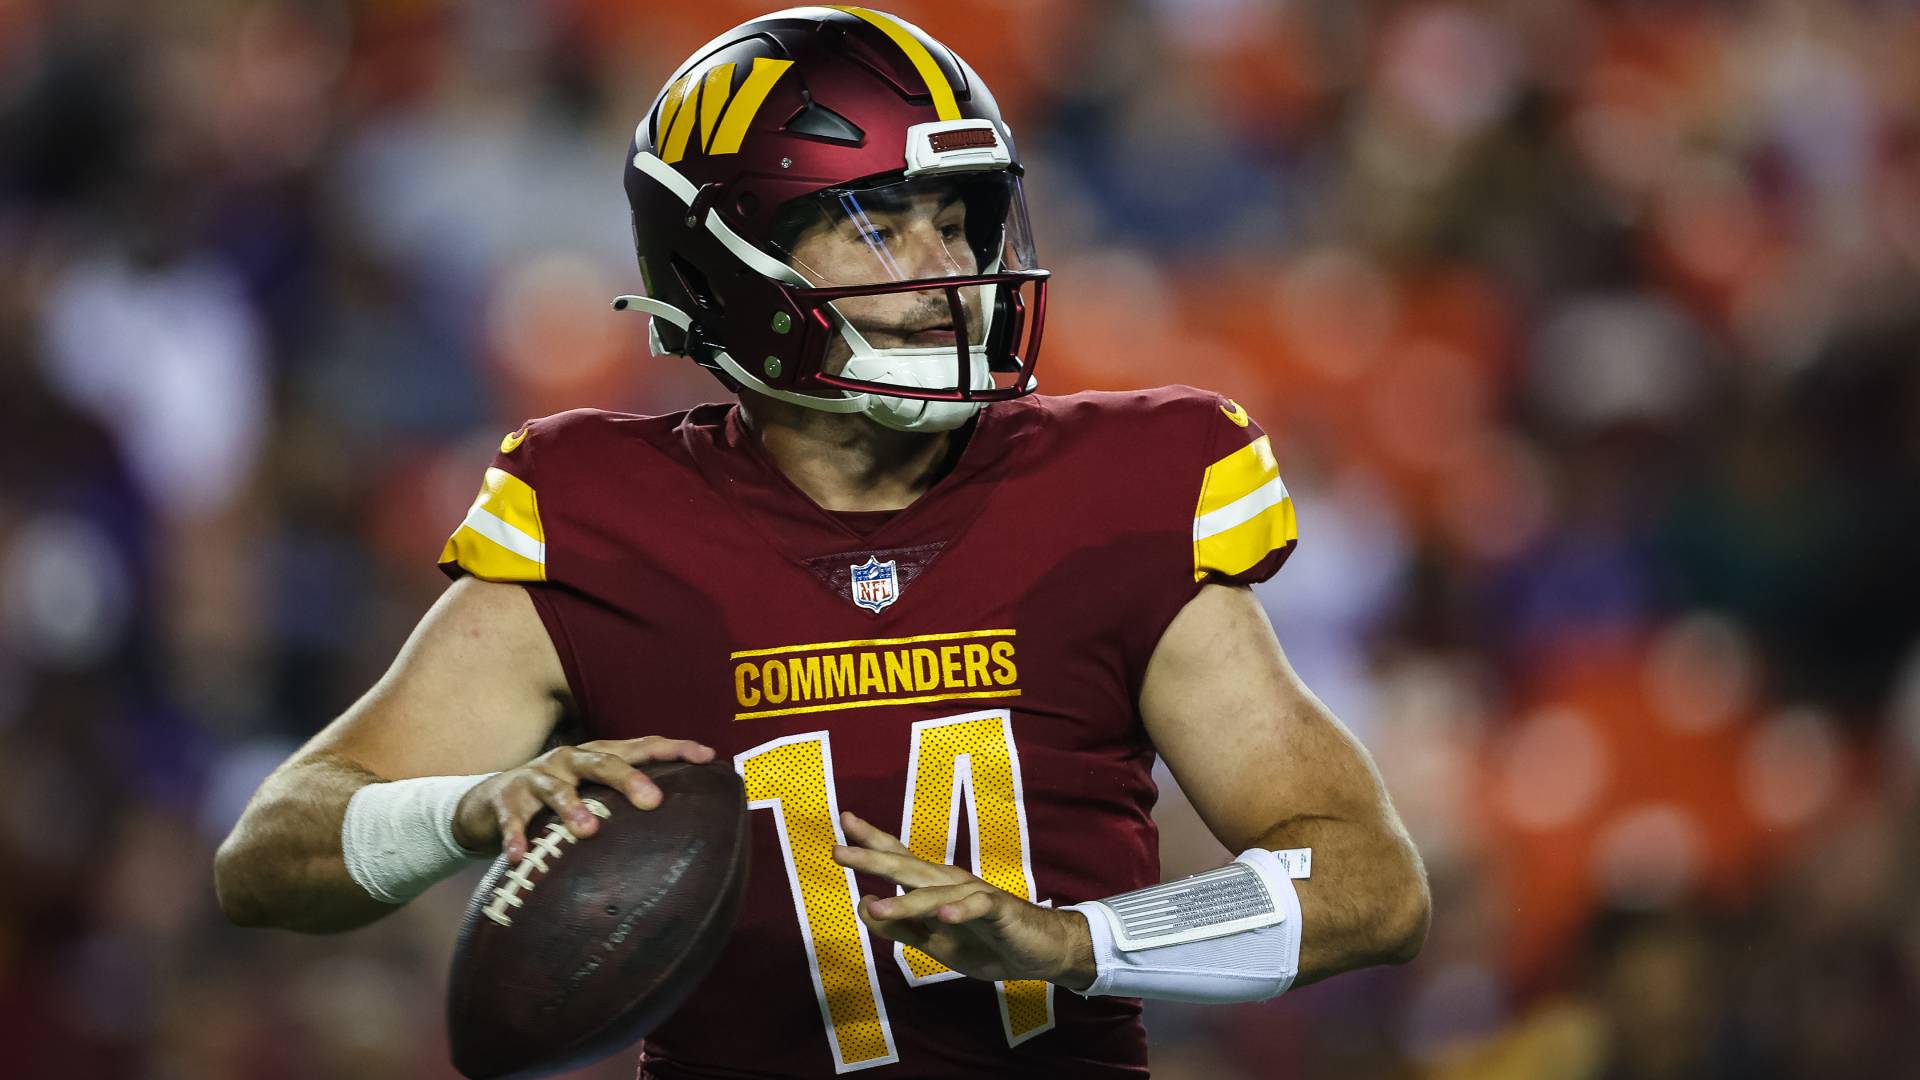 What time is the Washington Commanders vs. Arizona Cardinals game